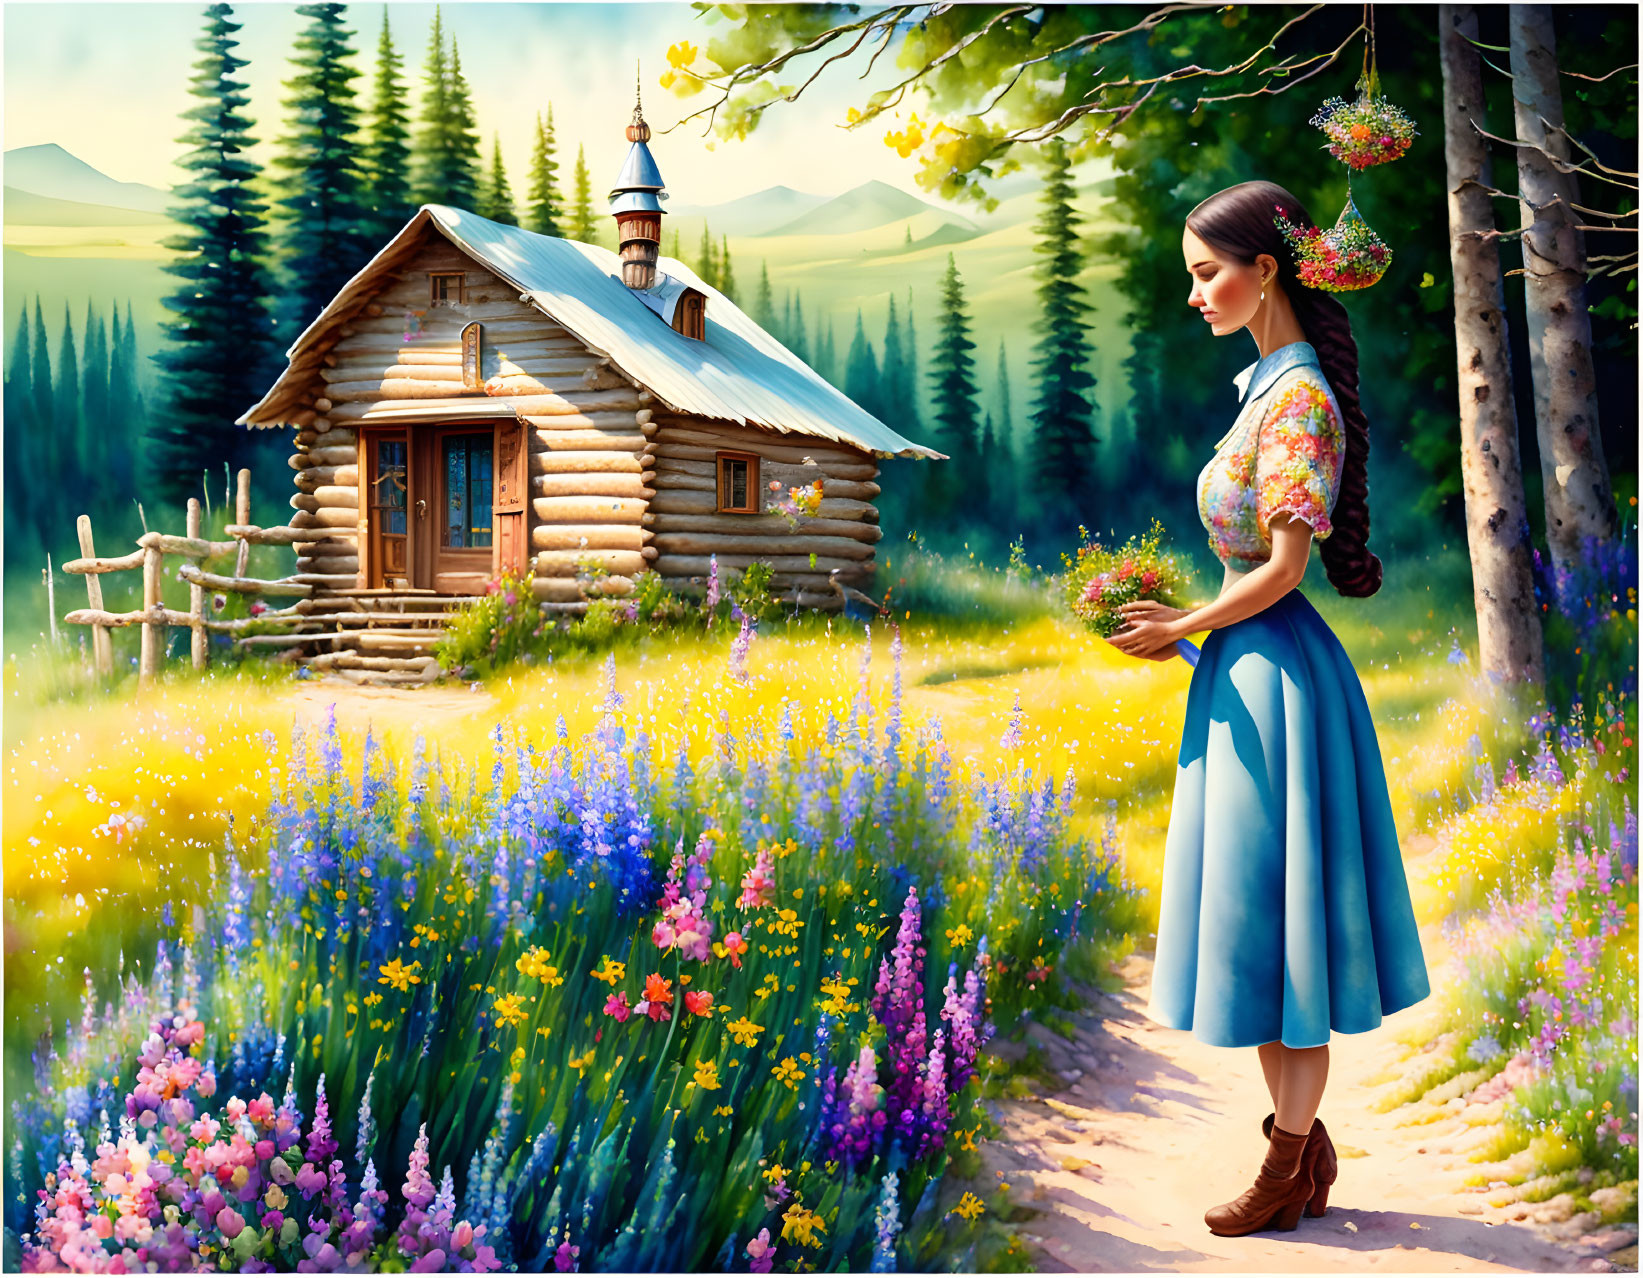 Woman in traditional outfit near blooming meadow and wooden cabin